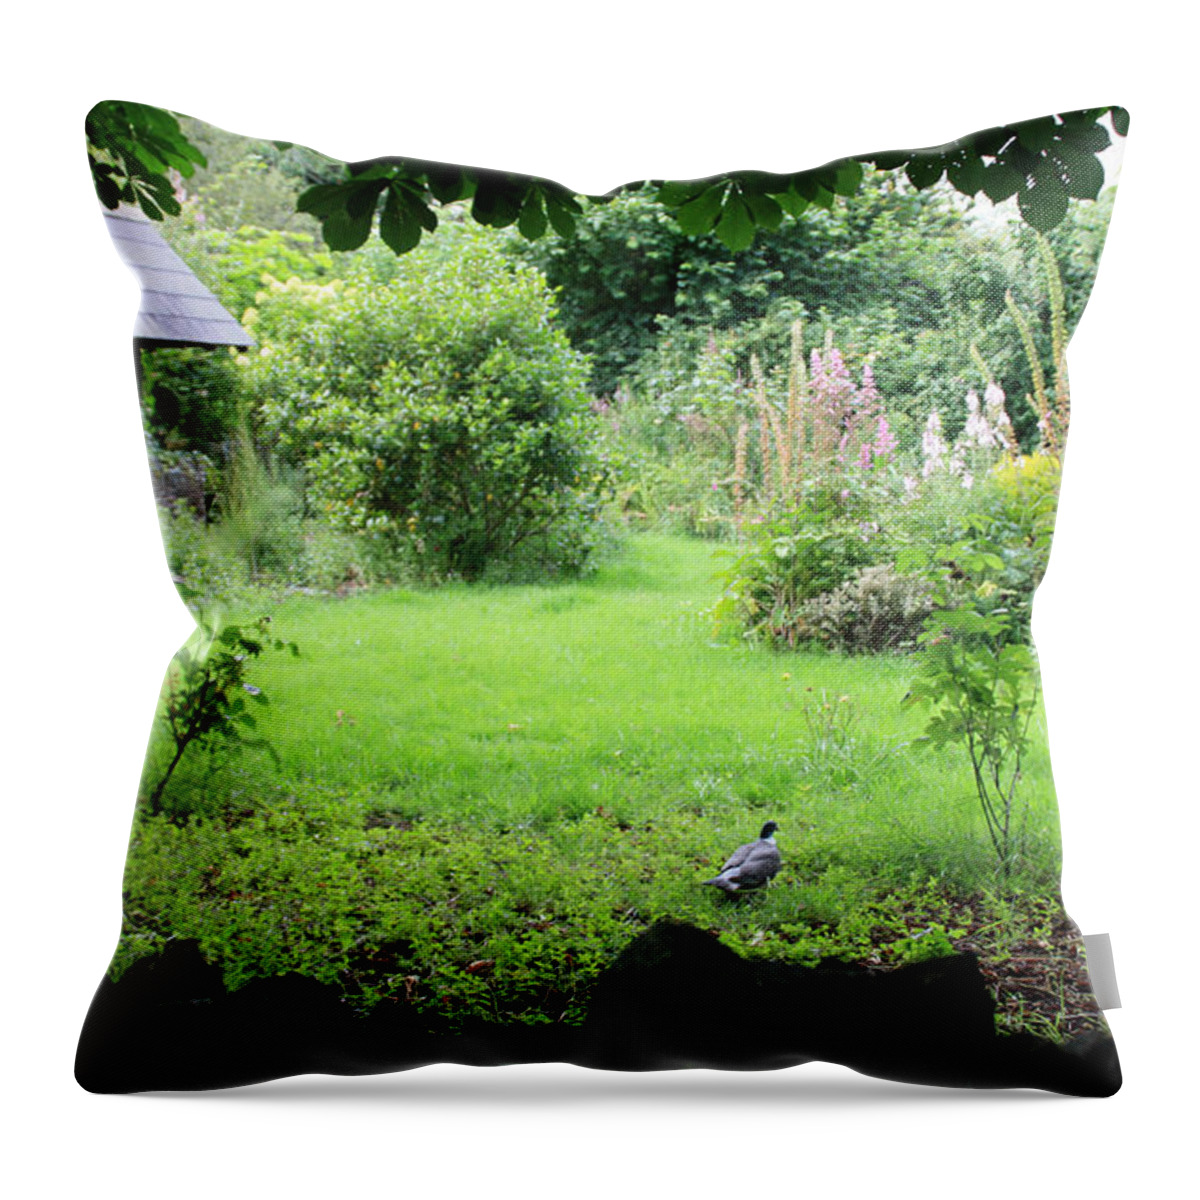 Monasterboice Throw Pillow featuring the photograph Monasterboice by Pat Moore